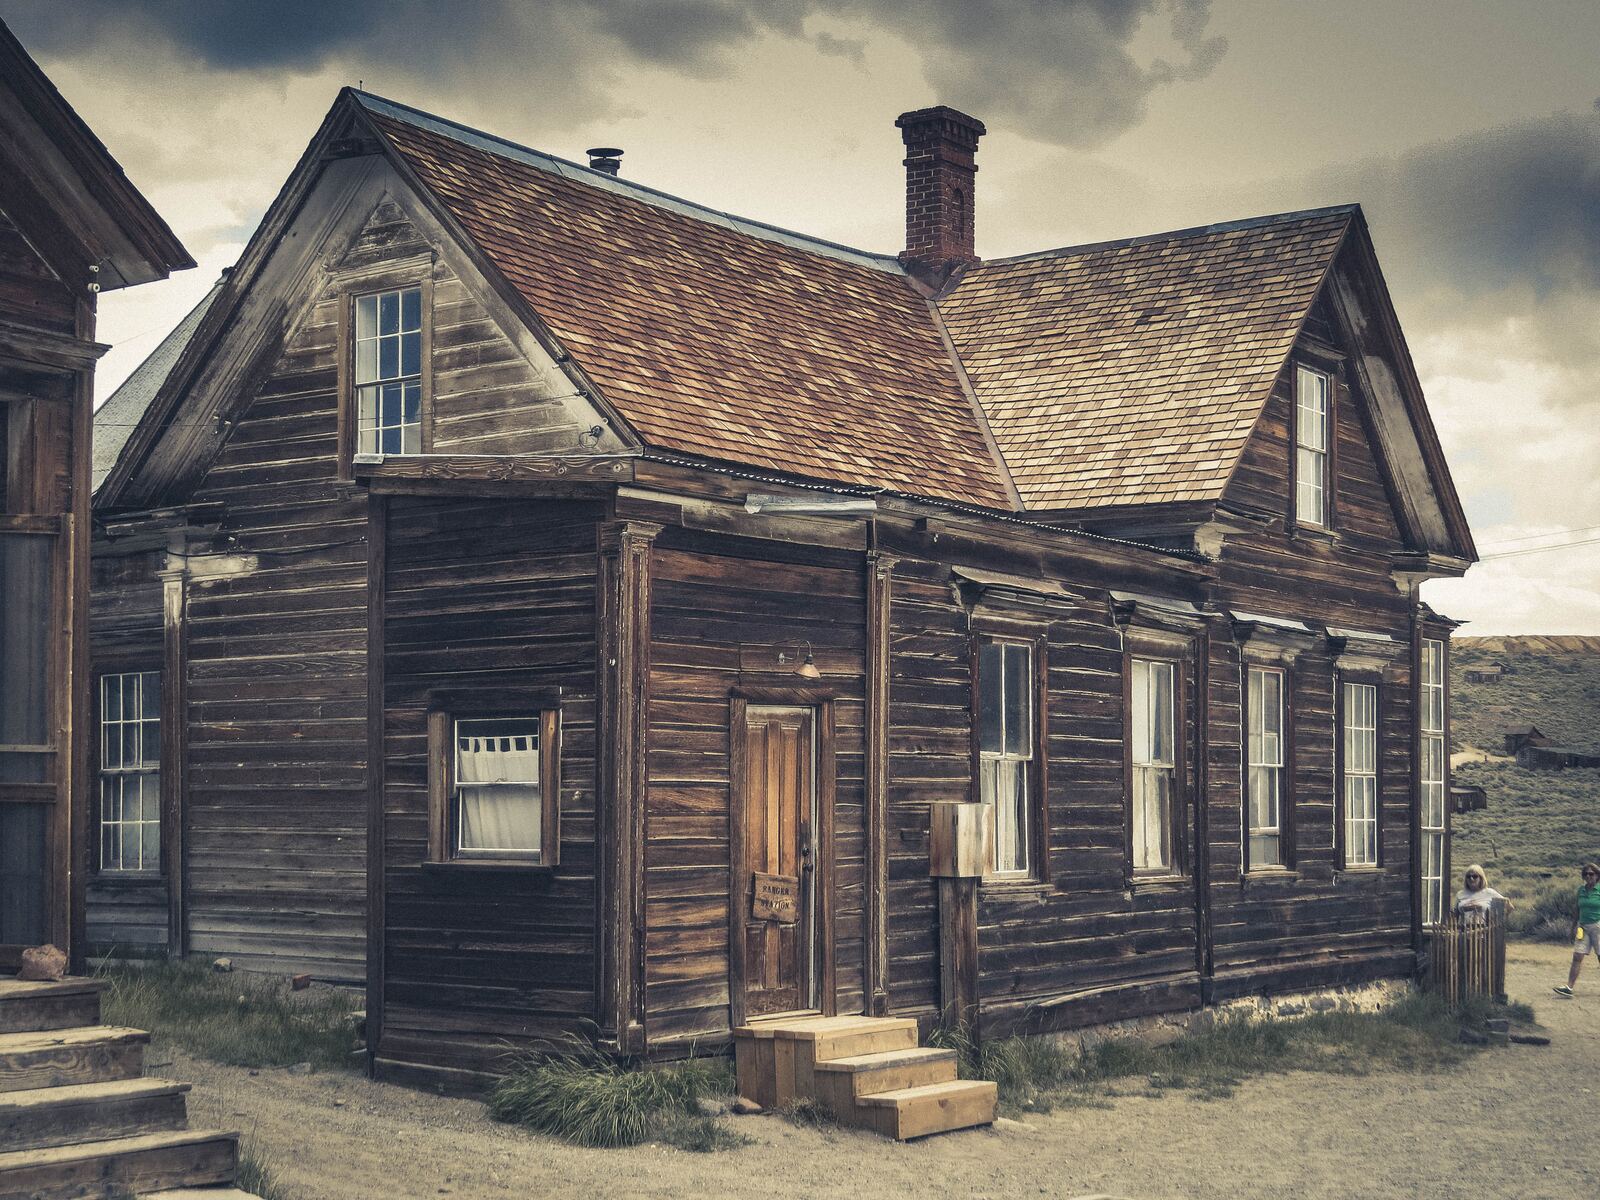 Image of Bodie Ghost Town by Team PhotoHound